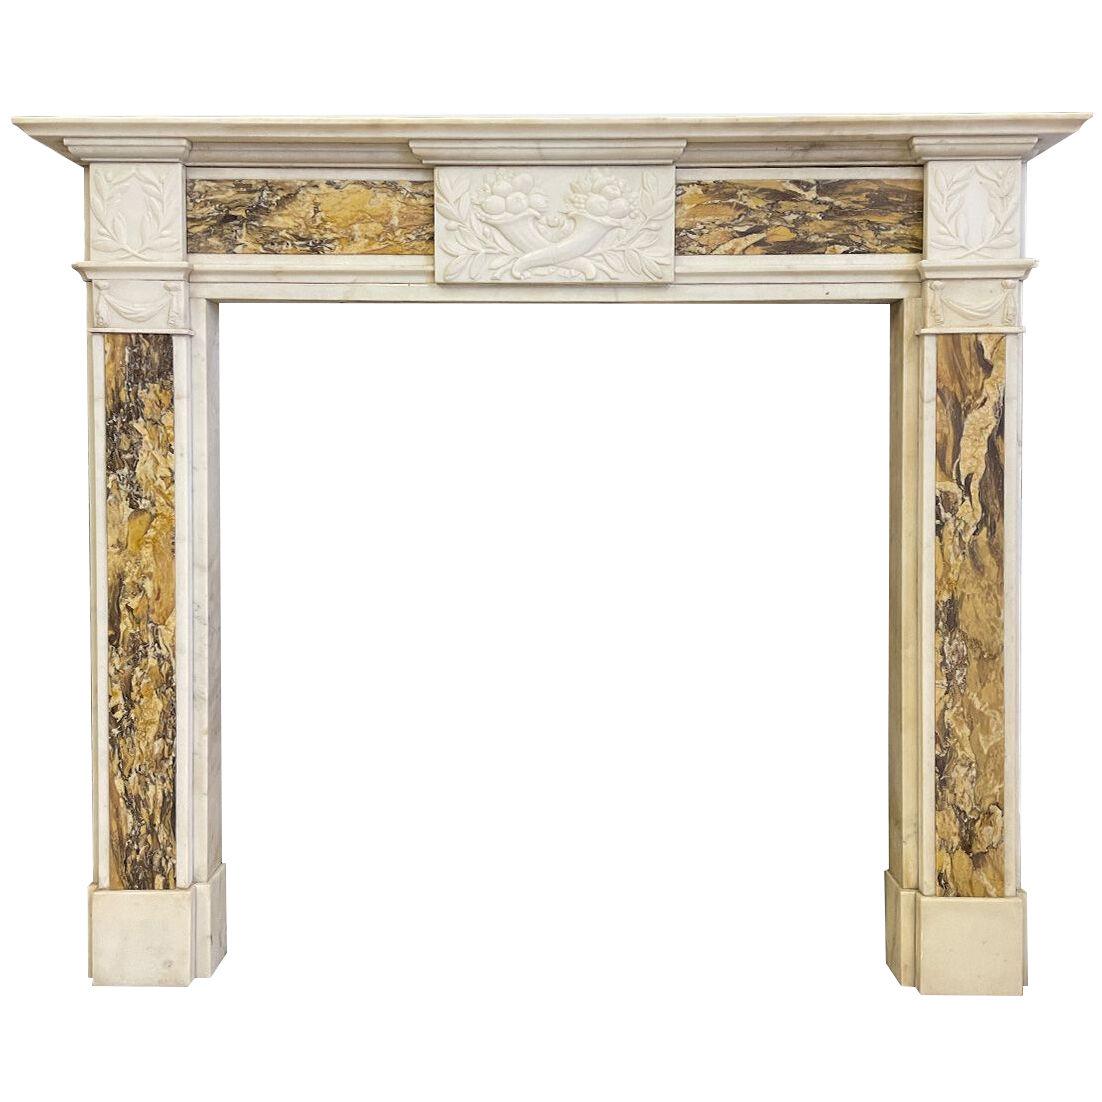 Georgian Style Statuary White and Siena Marble Fireplace Mantel